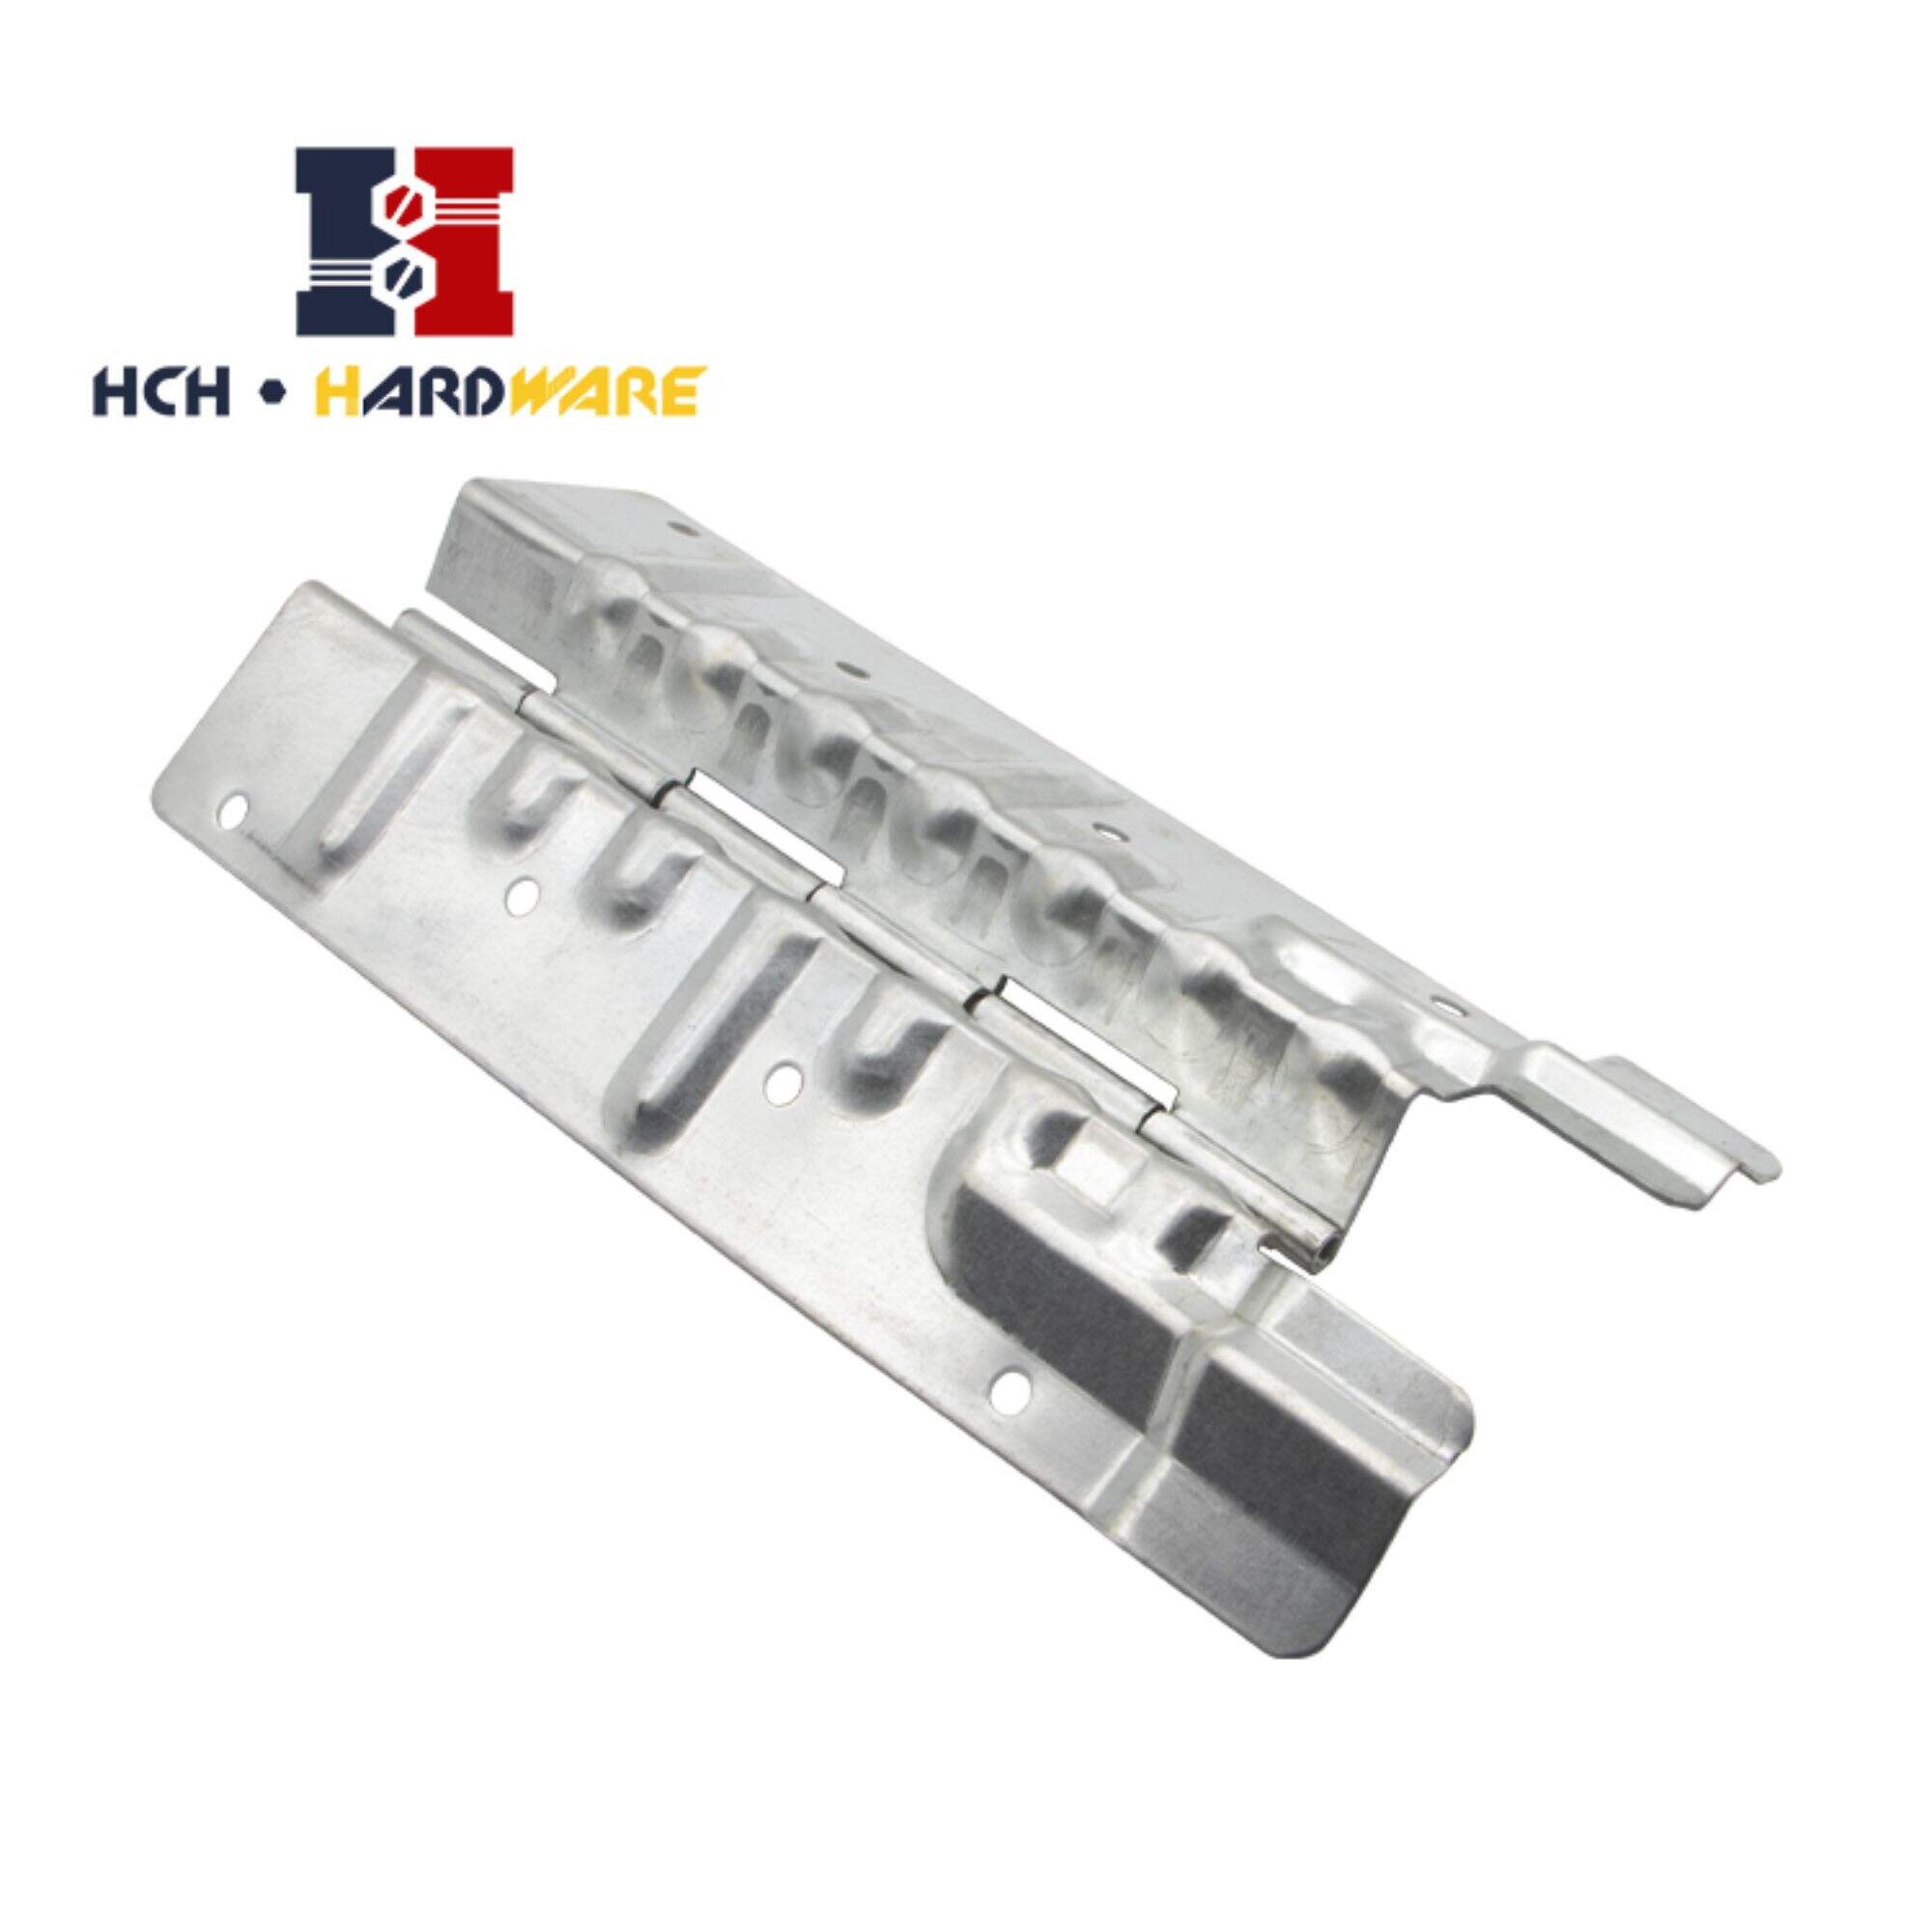 metal hinges Shipping crate container collar hinge for wooden box pallet collar hinge